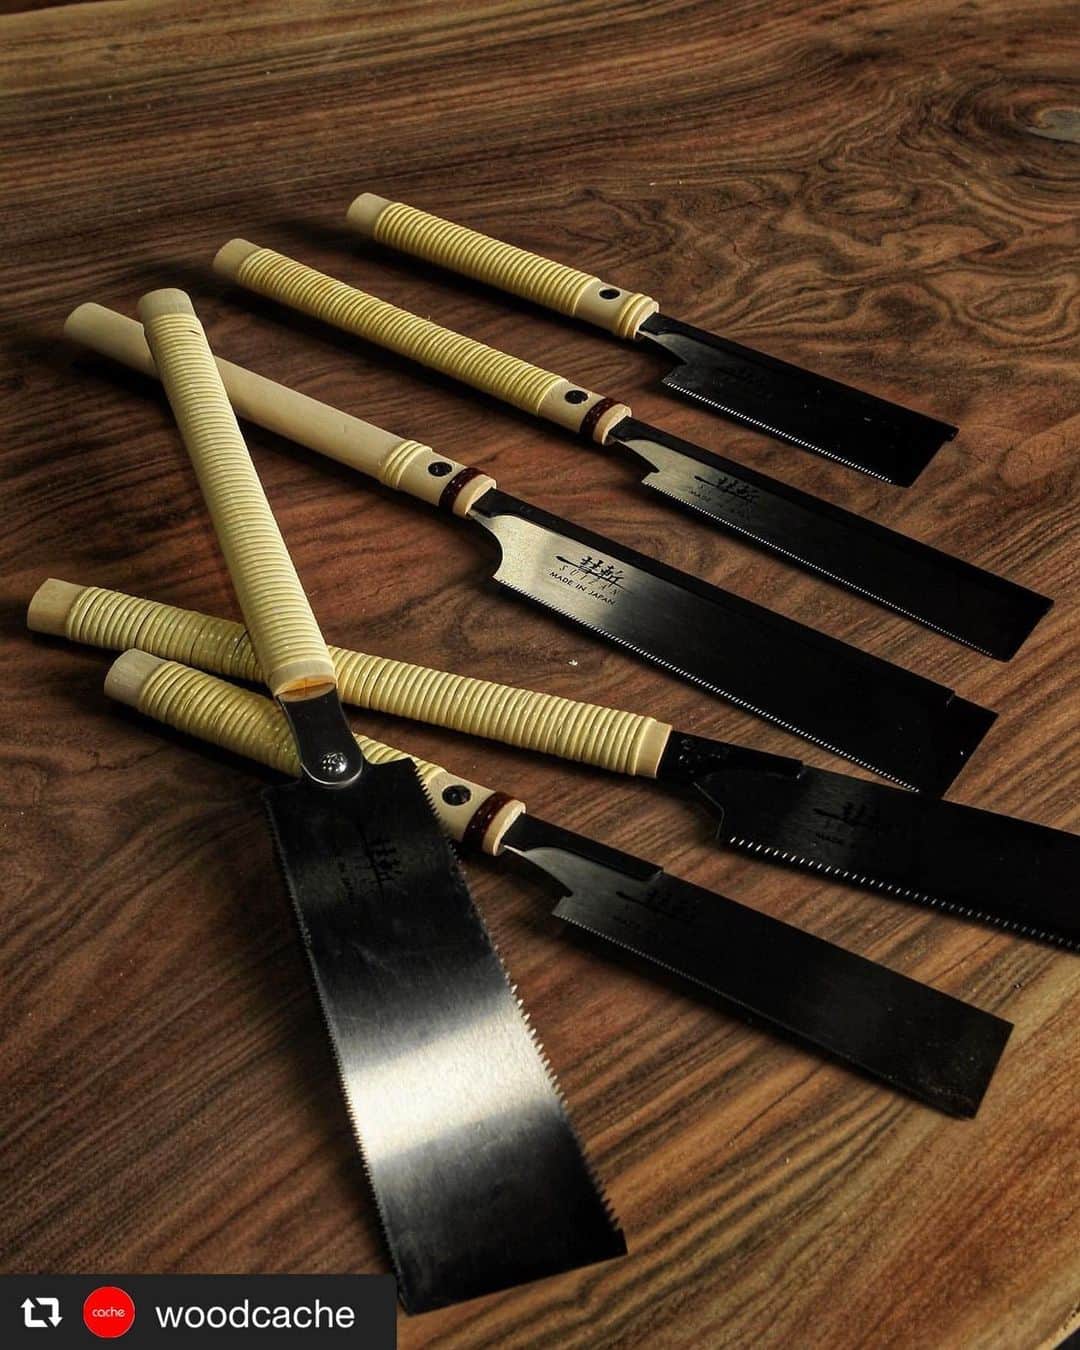 SUIZAN JAPANのインスタグラム：「@woodcache in Calgary, CANADA is now selling SUIZAN products!! If you live in Canada, please check it out👍﻿ ﻿ #repost📸 @woodcache﻿ SUIZAN Japanese Hand Saws have arrived at WOODCACHE. A full shipment including a double edged Ryoba, Ultra Fine Dozuki Dovetail and Flush Cut saws. Shop in store or online! #yycwoodworking #suizanjapan #joinery #woodworking #claro﻿ ﻿ #suizan #japanesesaw #japanesesaws #japanesetool #japanesetools #craftsman #craftsmanship #handsaw #pullsaw #ryoba #dozuki #dovetail #flushcut #woodwork #woodworker #woodworkers #woodworkingtools #diy #diyideas #japanesestyle #japanlife」